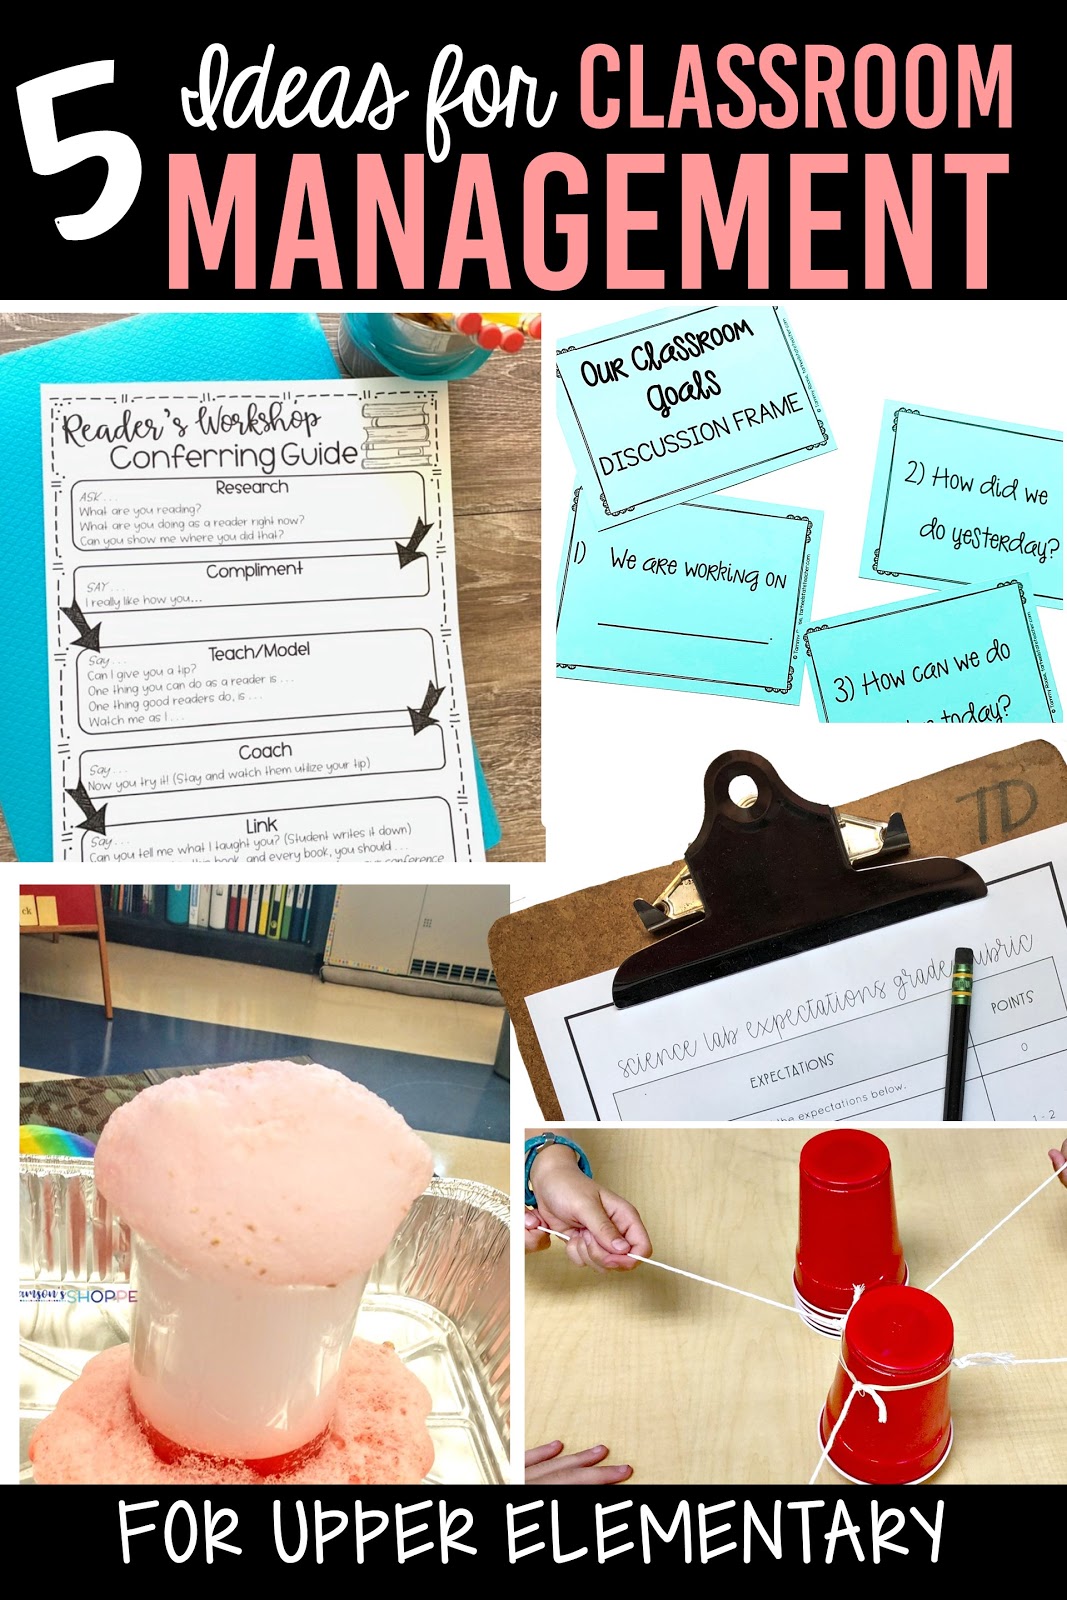 5 ideas for classroom management